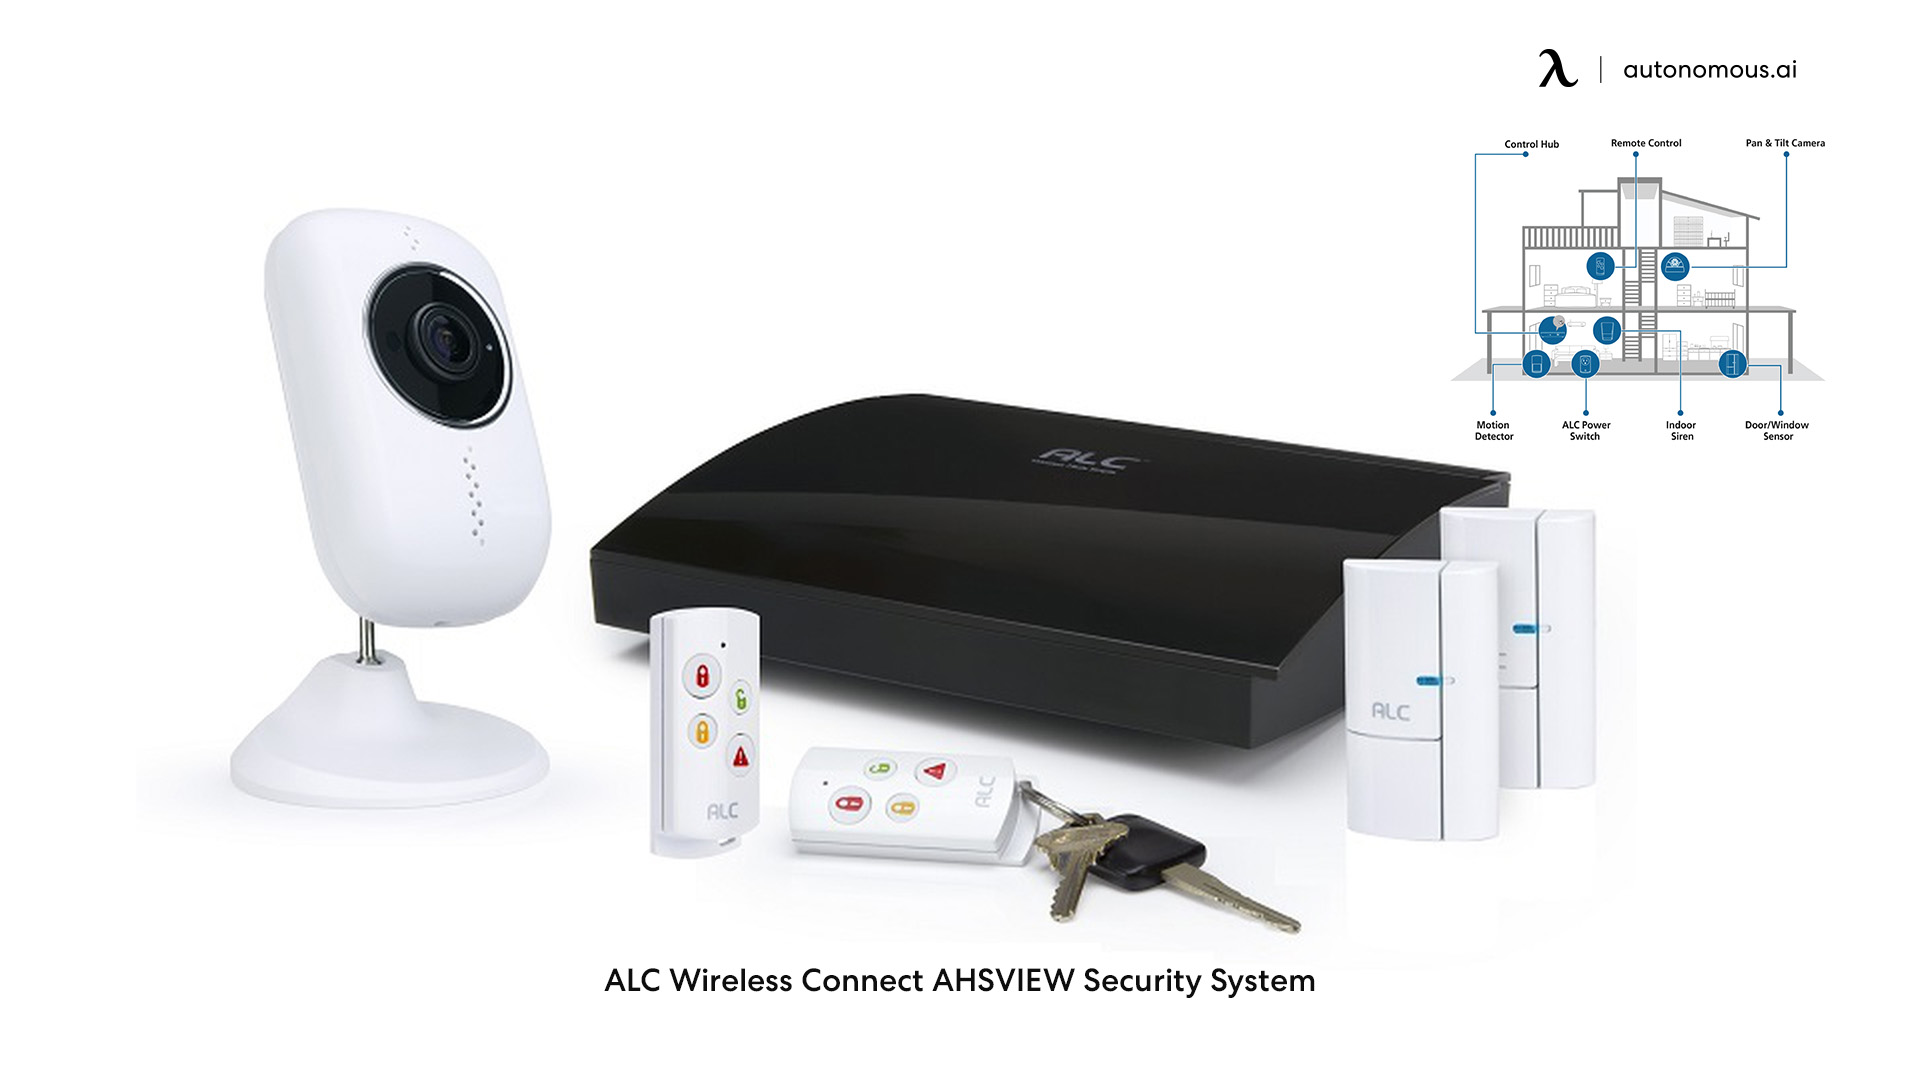 ALC Wireless Connect AHSVIEW Security System